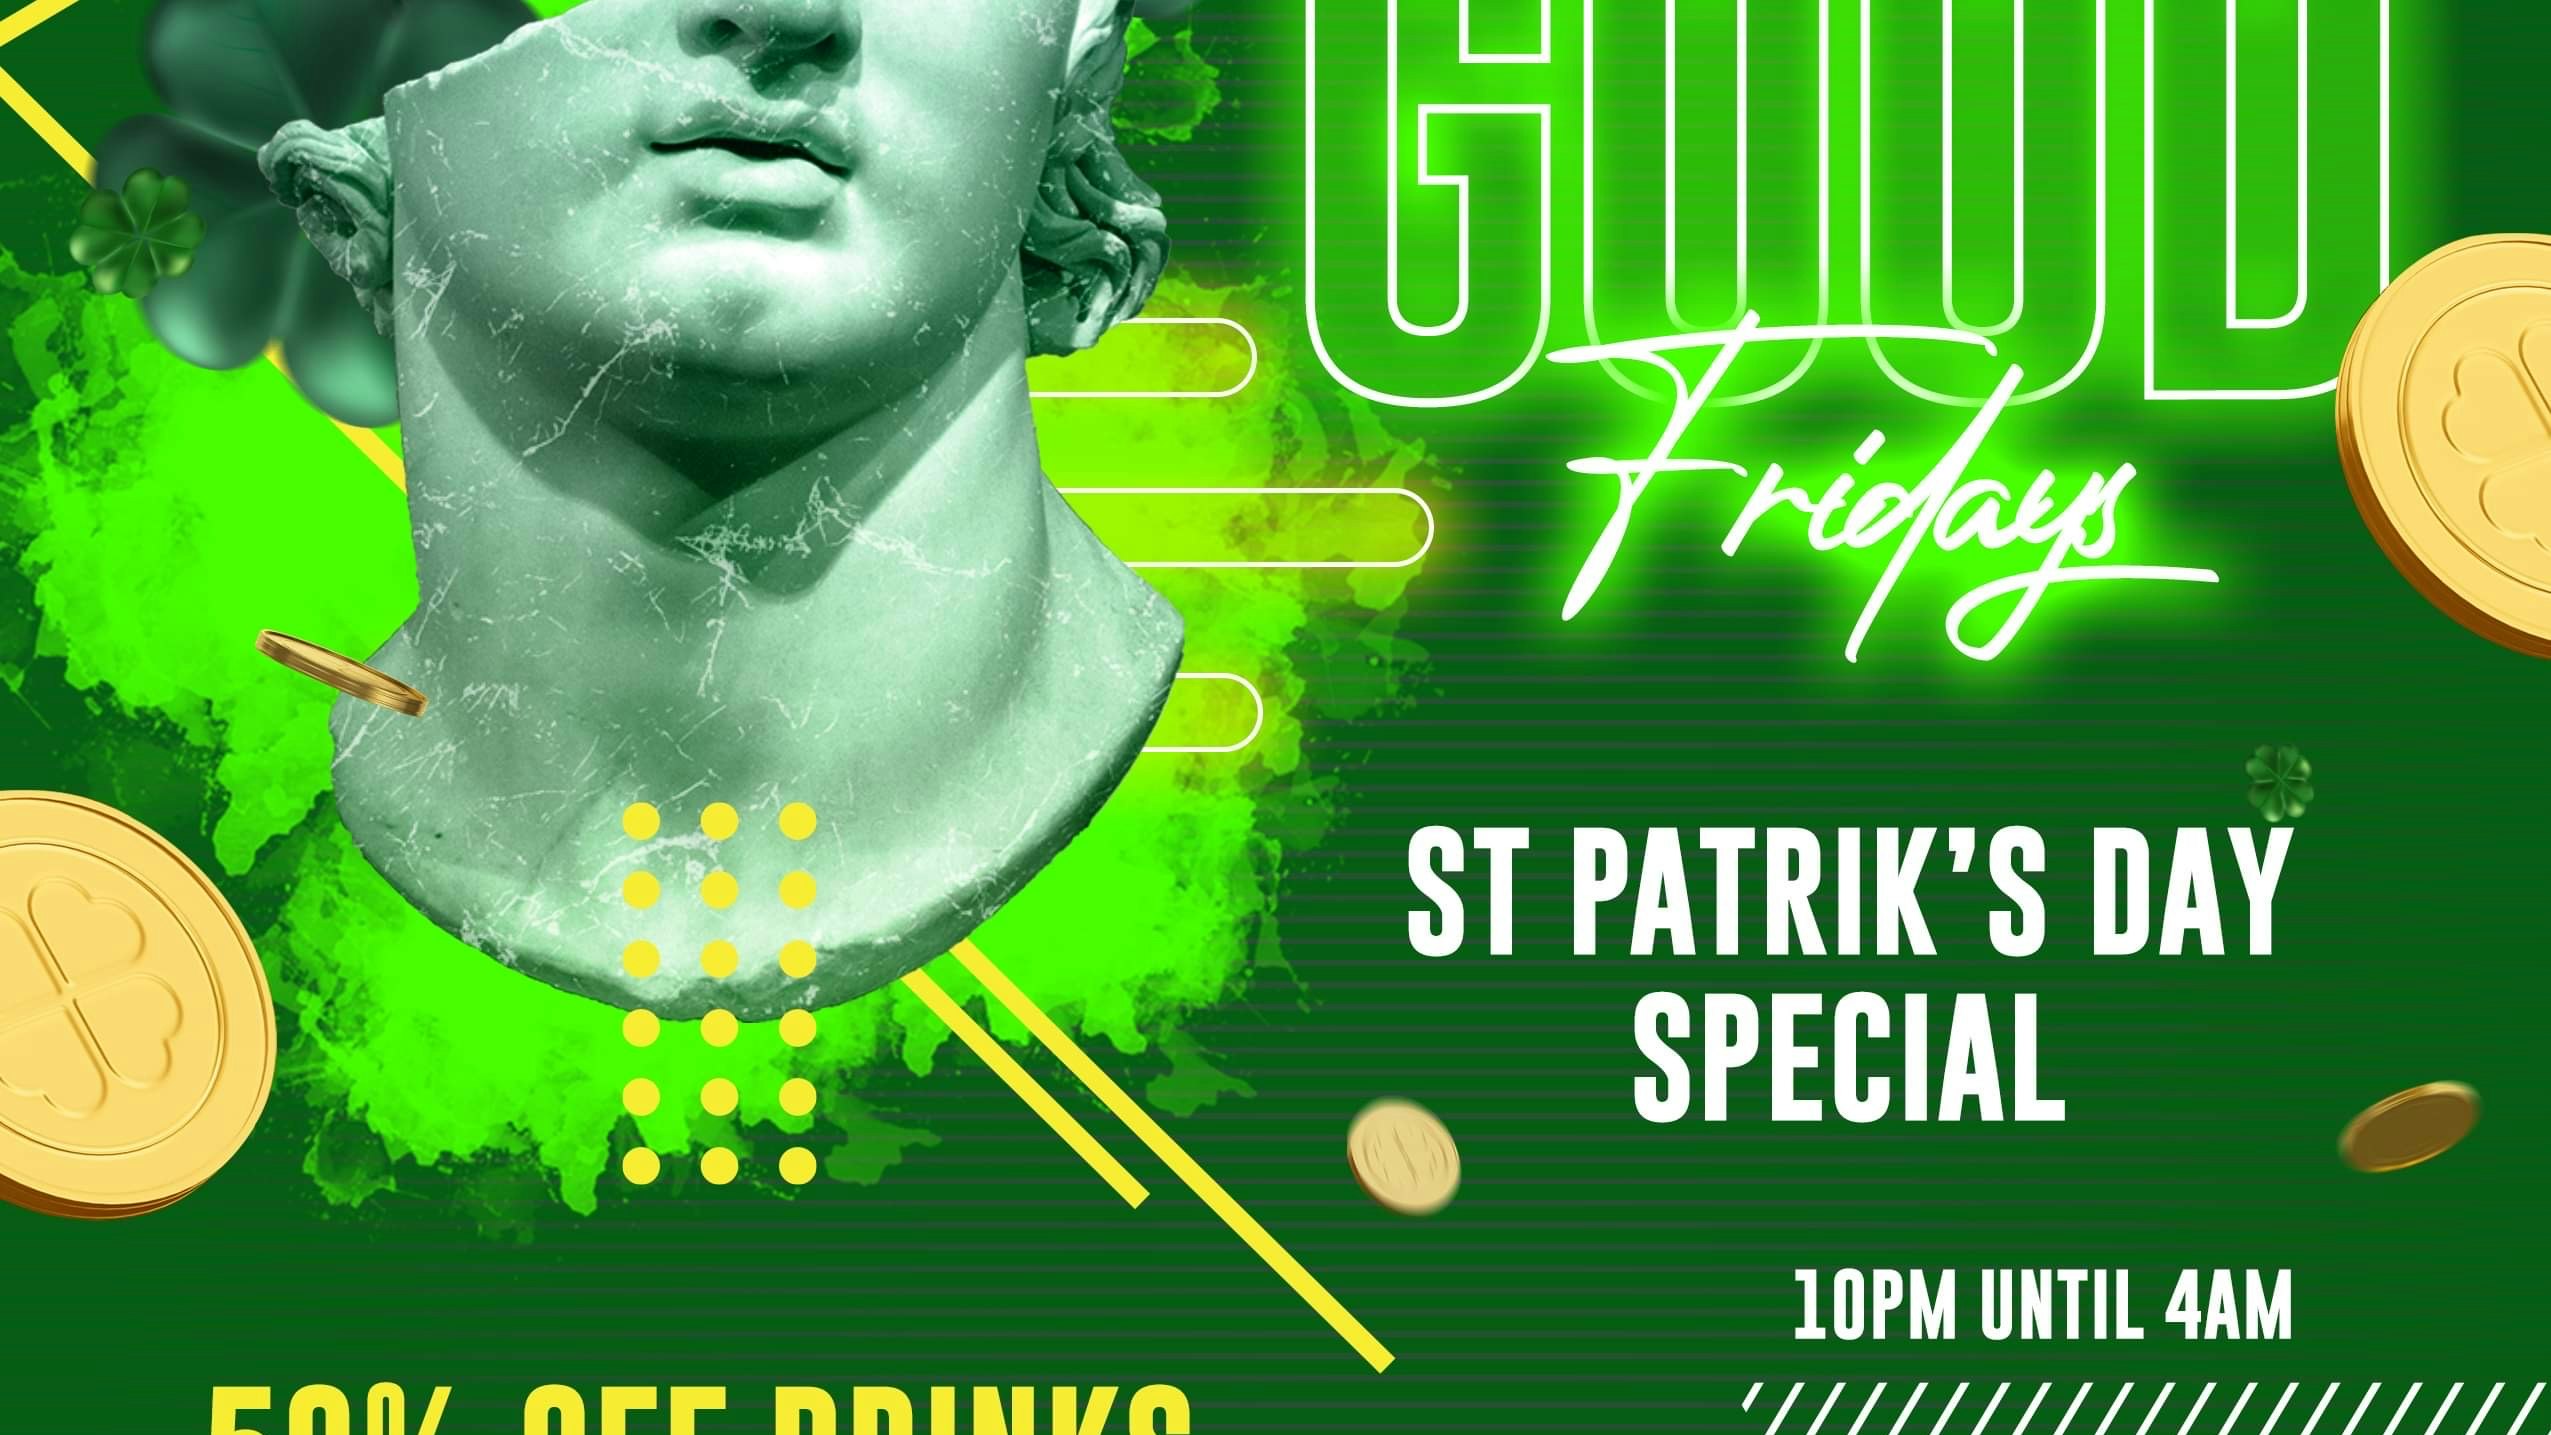 ST PATRICK’S DAY//Feel . Good . Friday @ Cafe Parfait